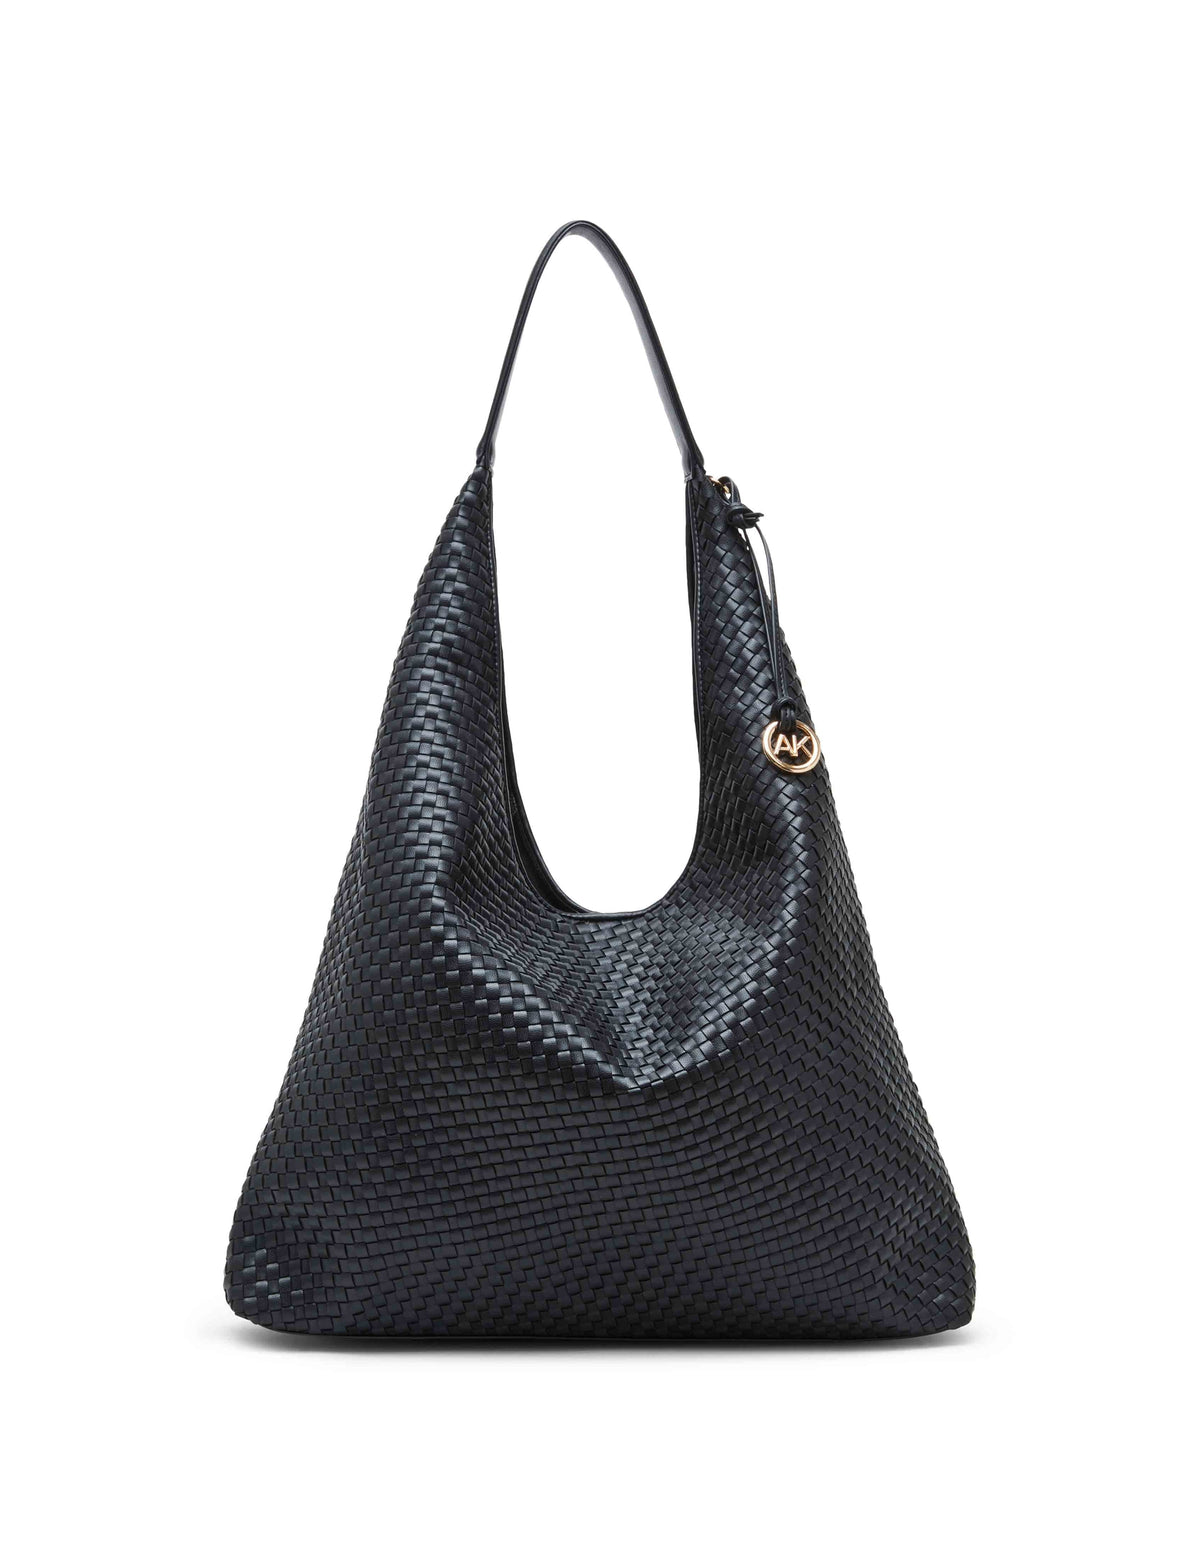 Anne Klein Black Large Woven Hobo With Pouch